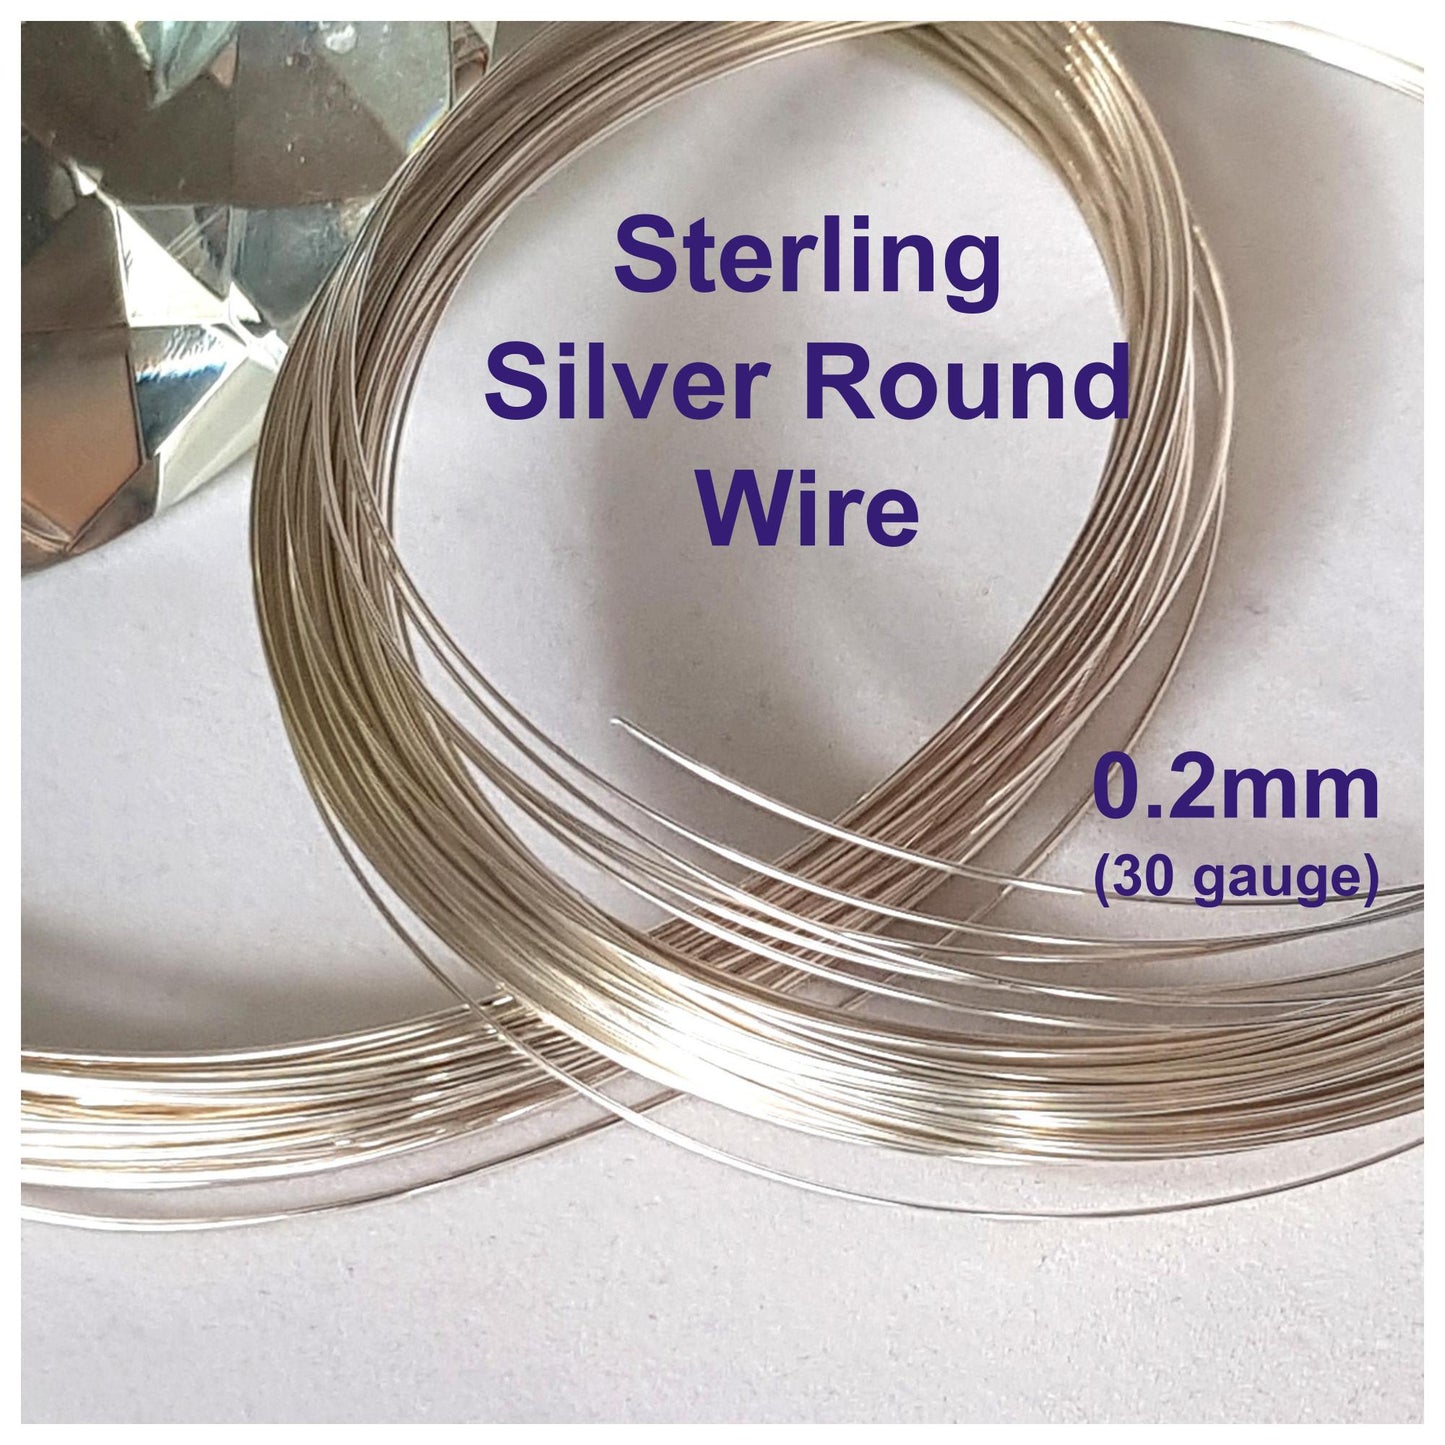 FAB Metal - 0.2mm Round Sterling Silver Wire (30 gauge) | Jewellery Making Supply